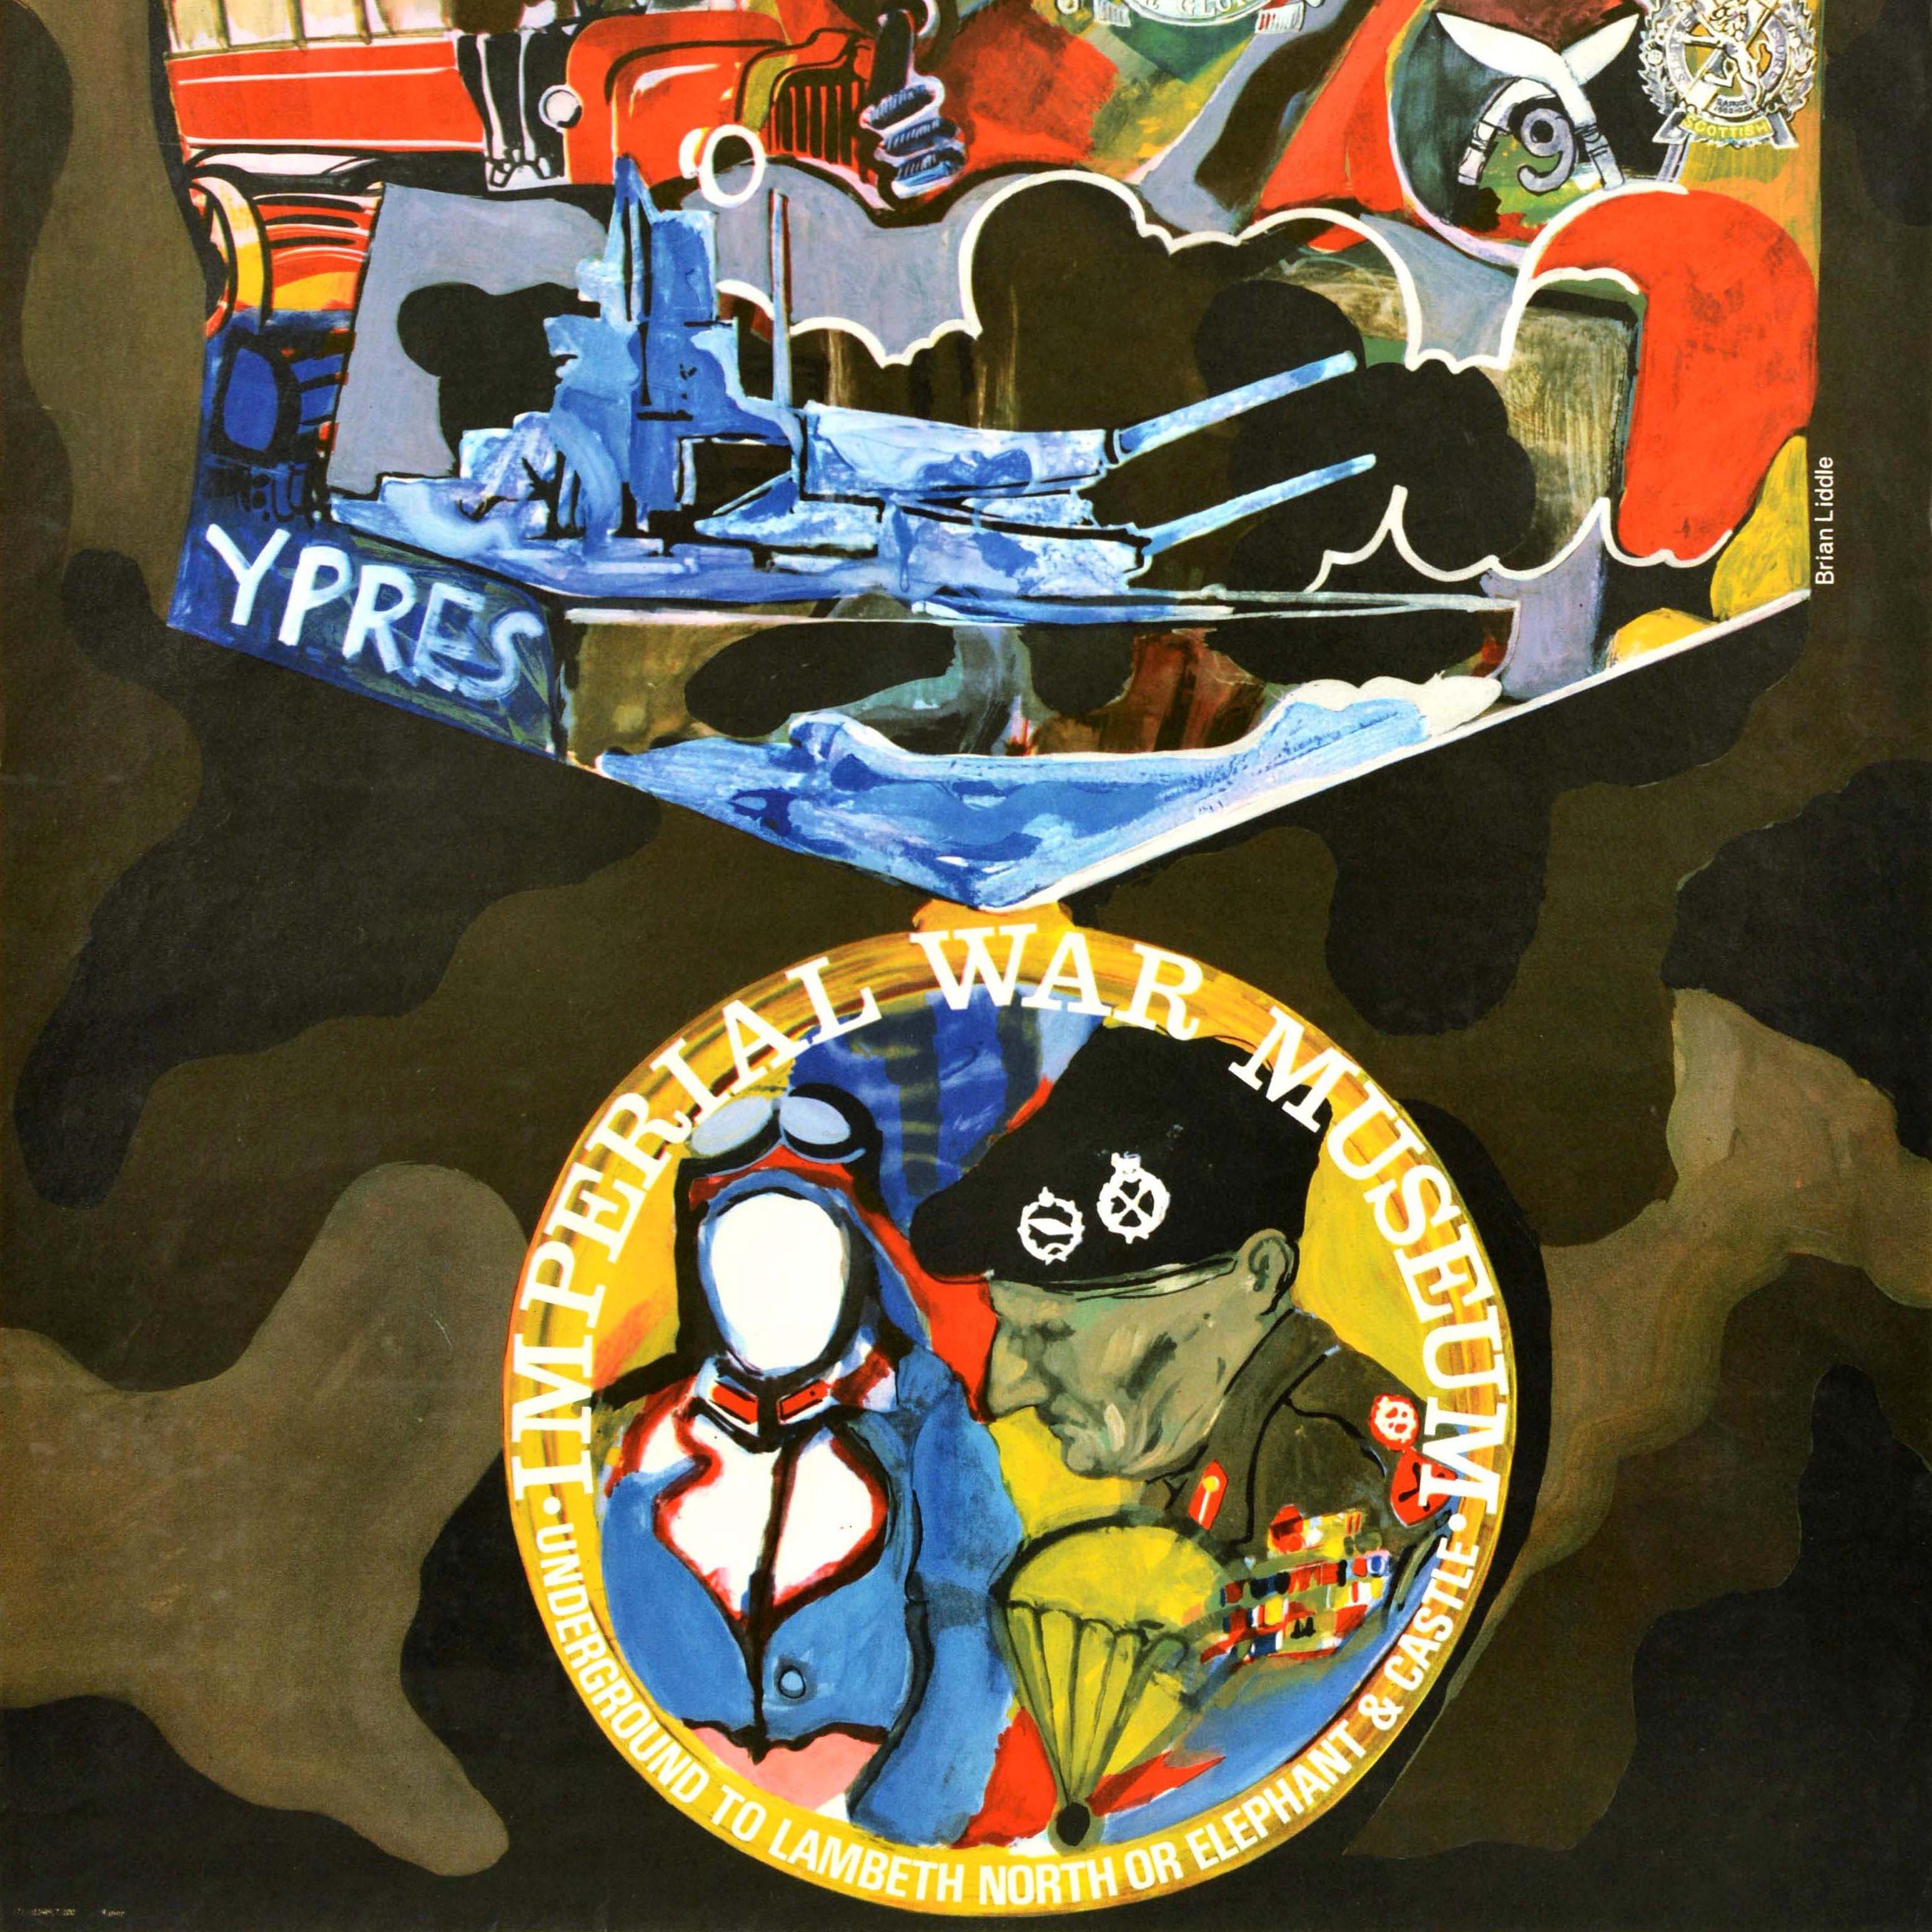 Vintage official reproduction poster issued for London Underground featuring colourful World War One artwork depicting the Battle of Ypres with images of an RAF Royal Air Force plane, a red London bus carrying soldiers, various medals and war